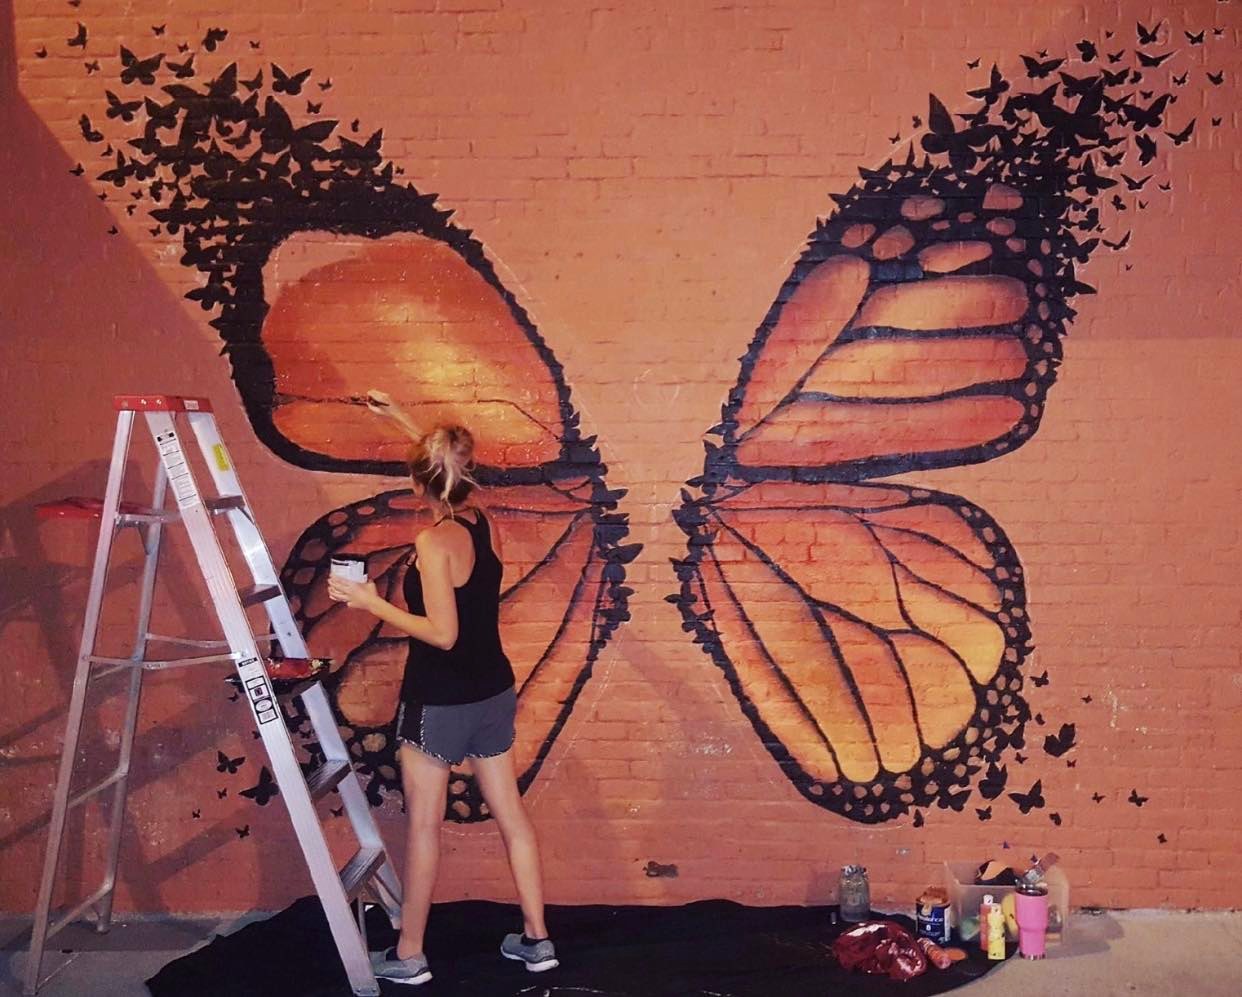 A woman paints a mural on an outdoor wall